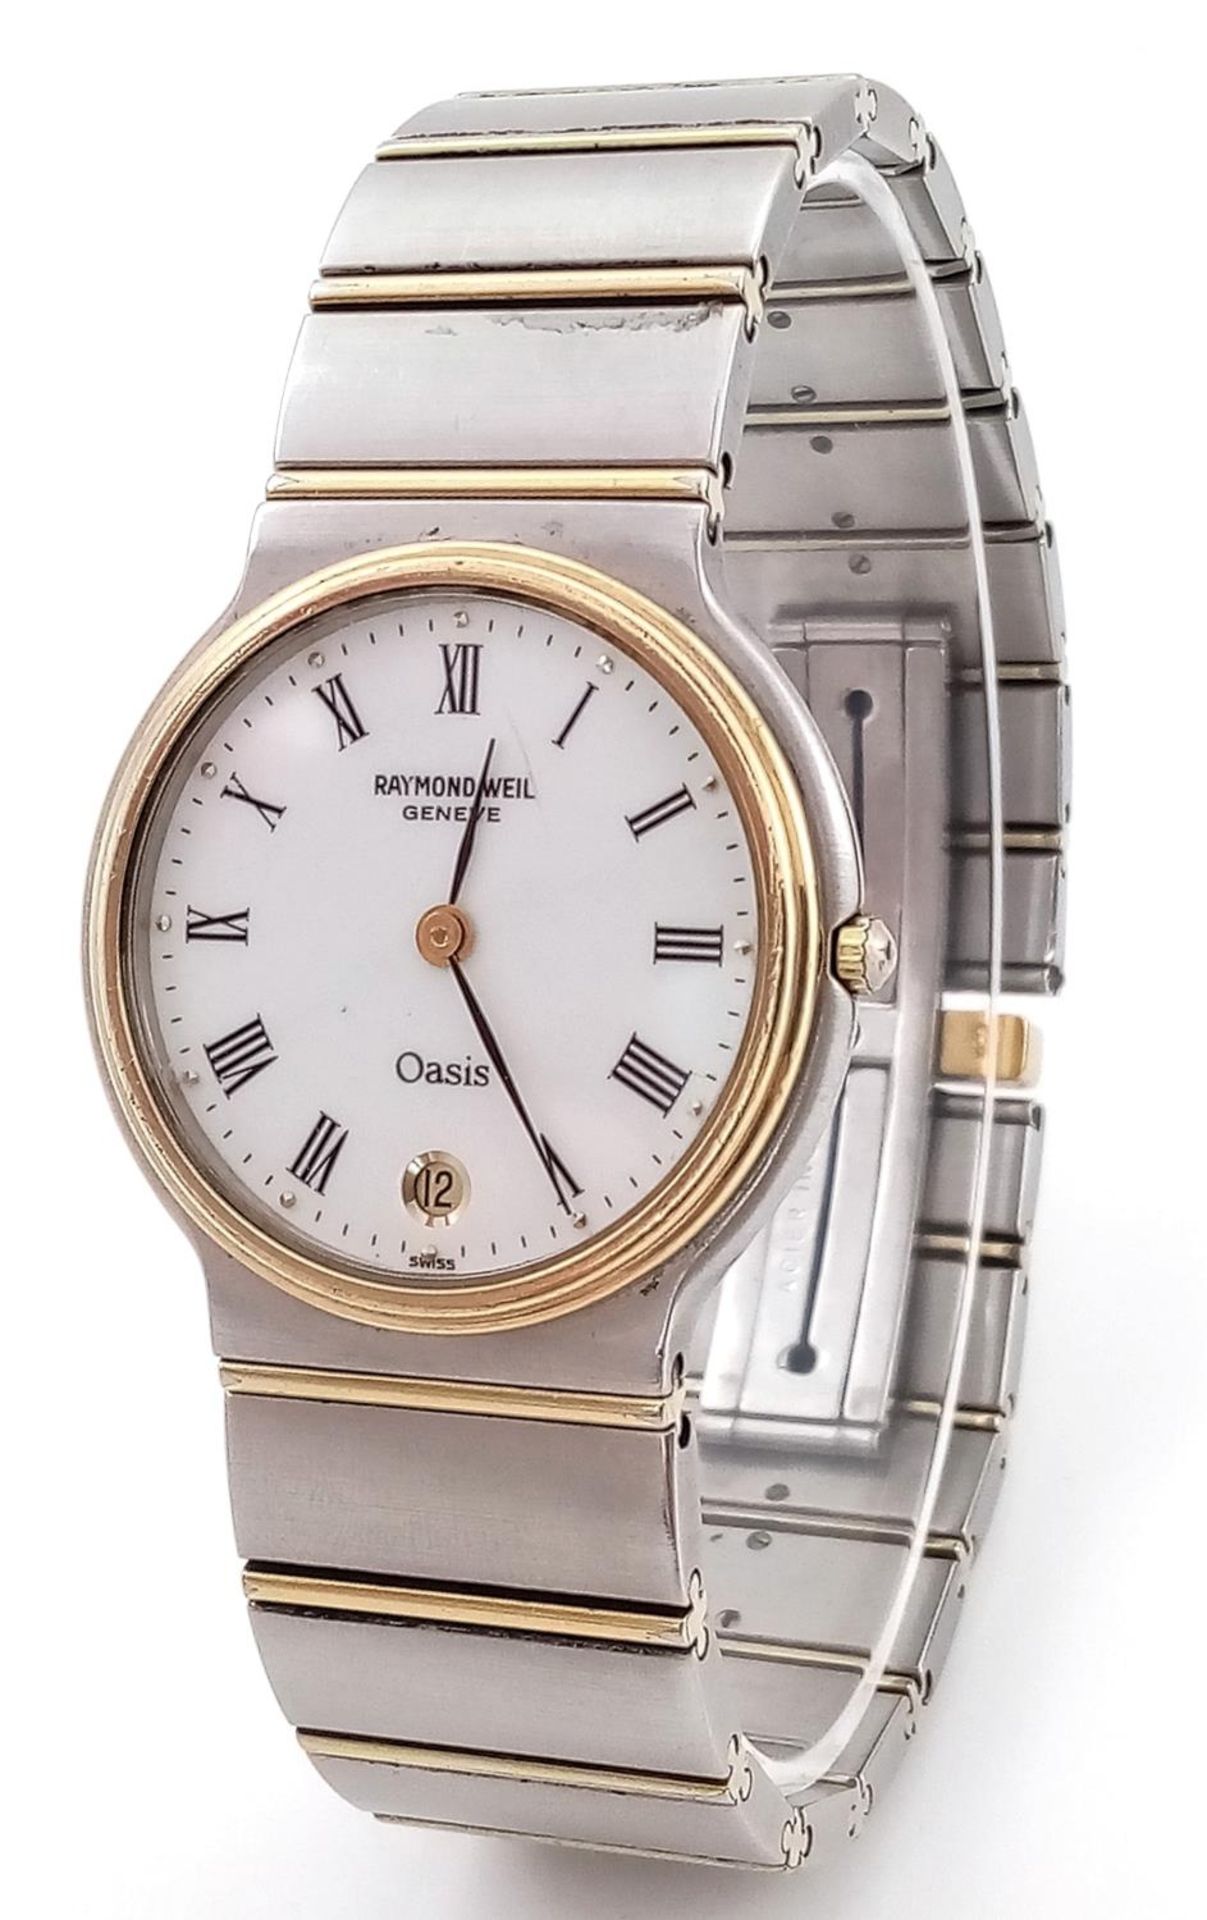 A Raymond Weil Oasis Quartz Watch. Stainless steel bracelet and case - 32mm. White dial. In